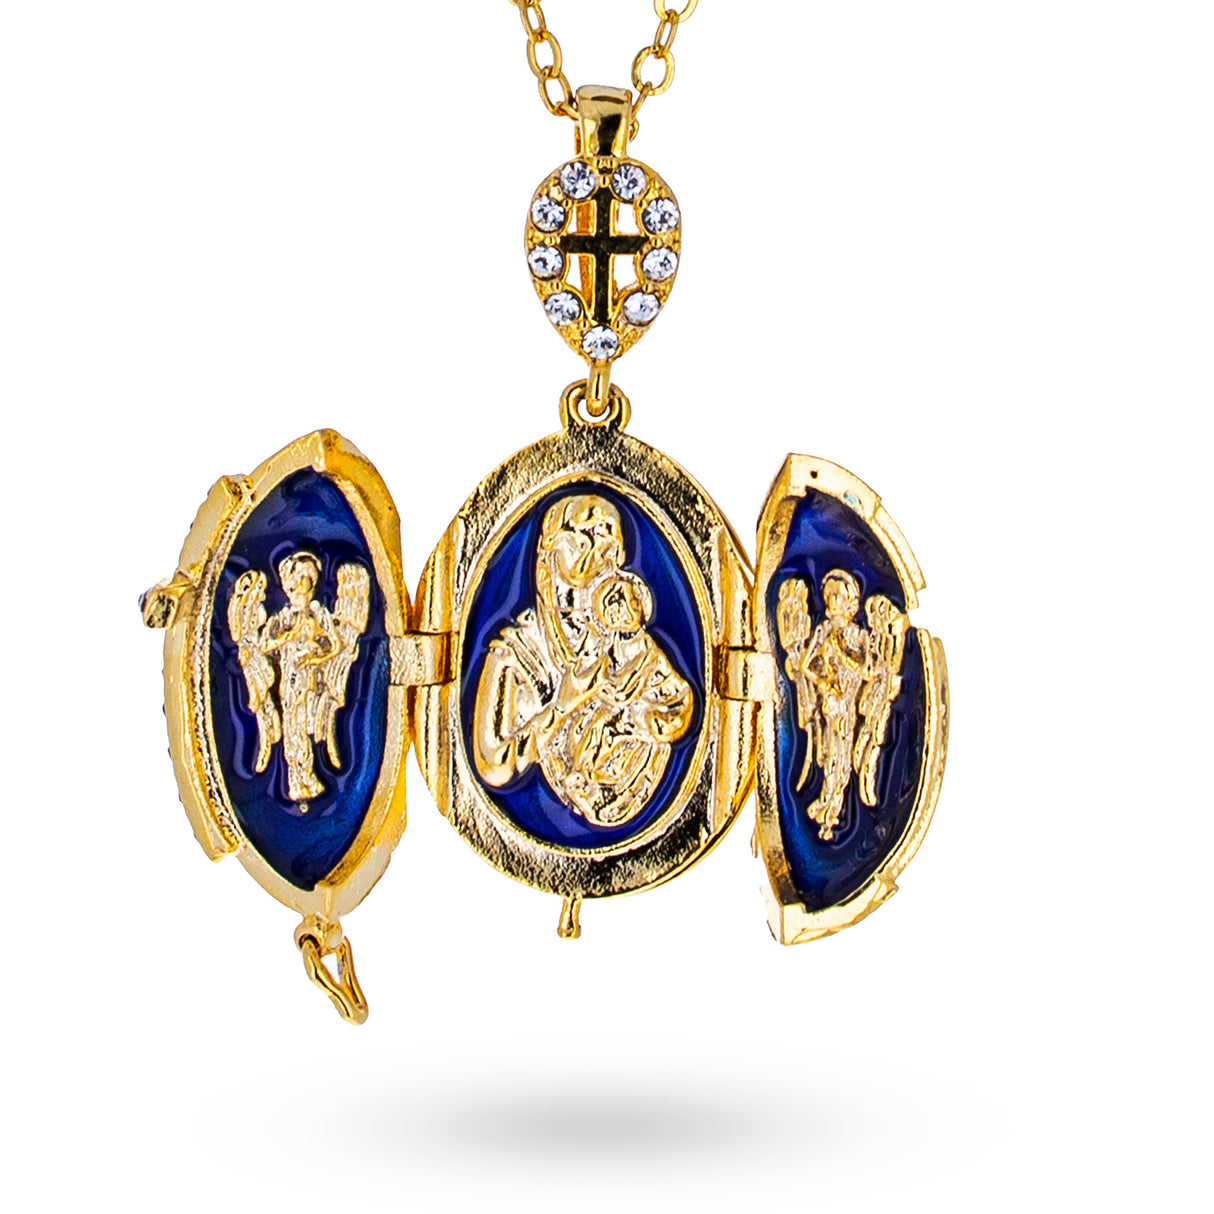 Shop Blue Brass 50 Crystals Triptych Icons Royal Egg Pendant Necklace. Buy Jewelry Necklaces Royal Blue Oval Pewter for Sale by Online Gift Shop BestPysanky jewelry Russian Easter egg pendant necklace charm locket jeweled enameled crystals vintage style Faberge Swarovski